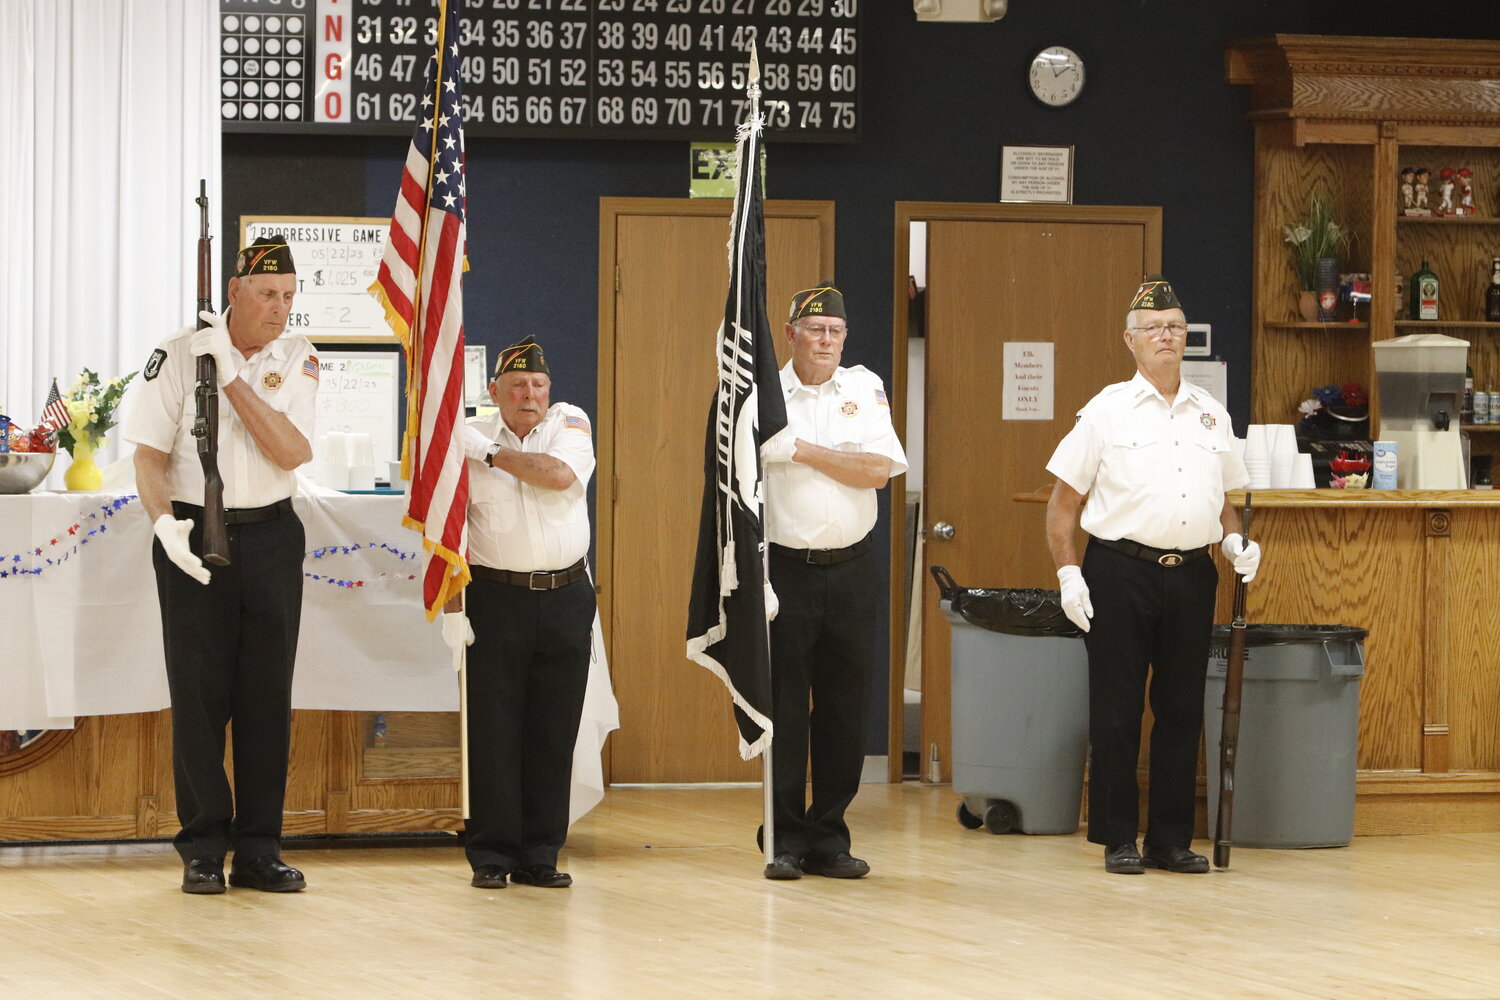 The honor guard prepares to present the colors during Memorial Day events in Warrenton.